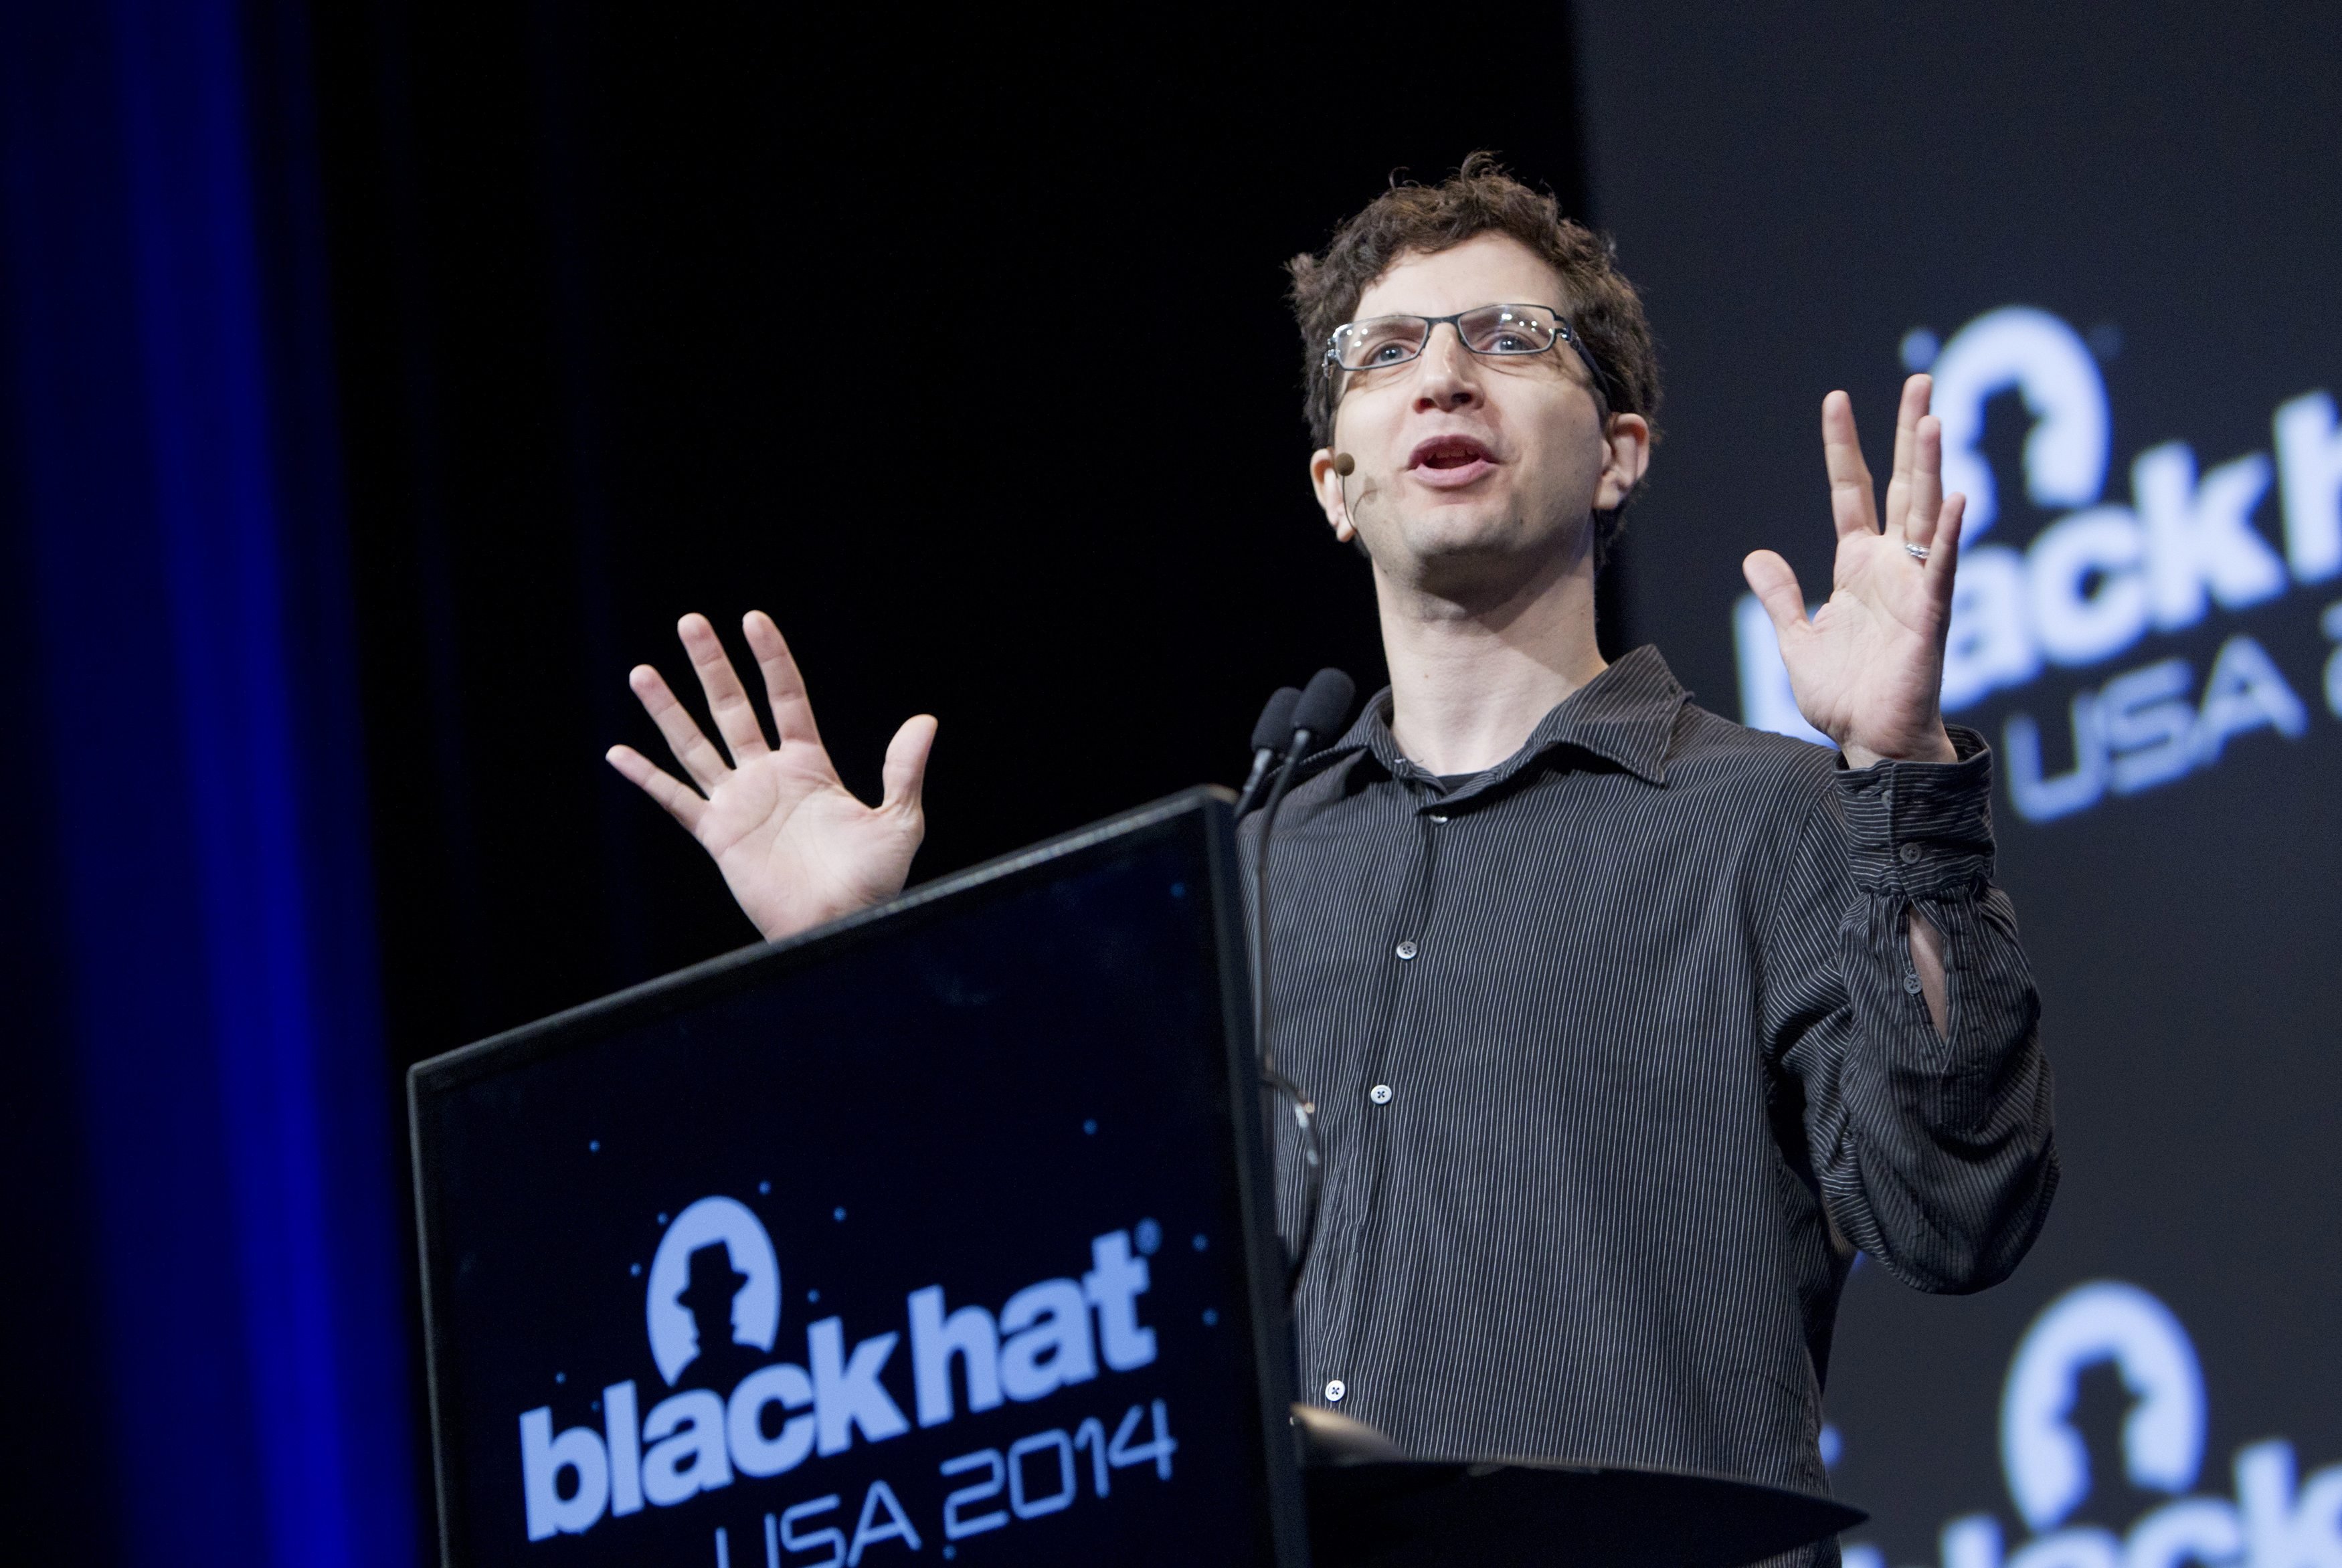 Black Hat founder Jeff Moss speaks during the Black Hat USA 2014 hacker conference at the Mandalay Bay Convention Center in Las Vegas